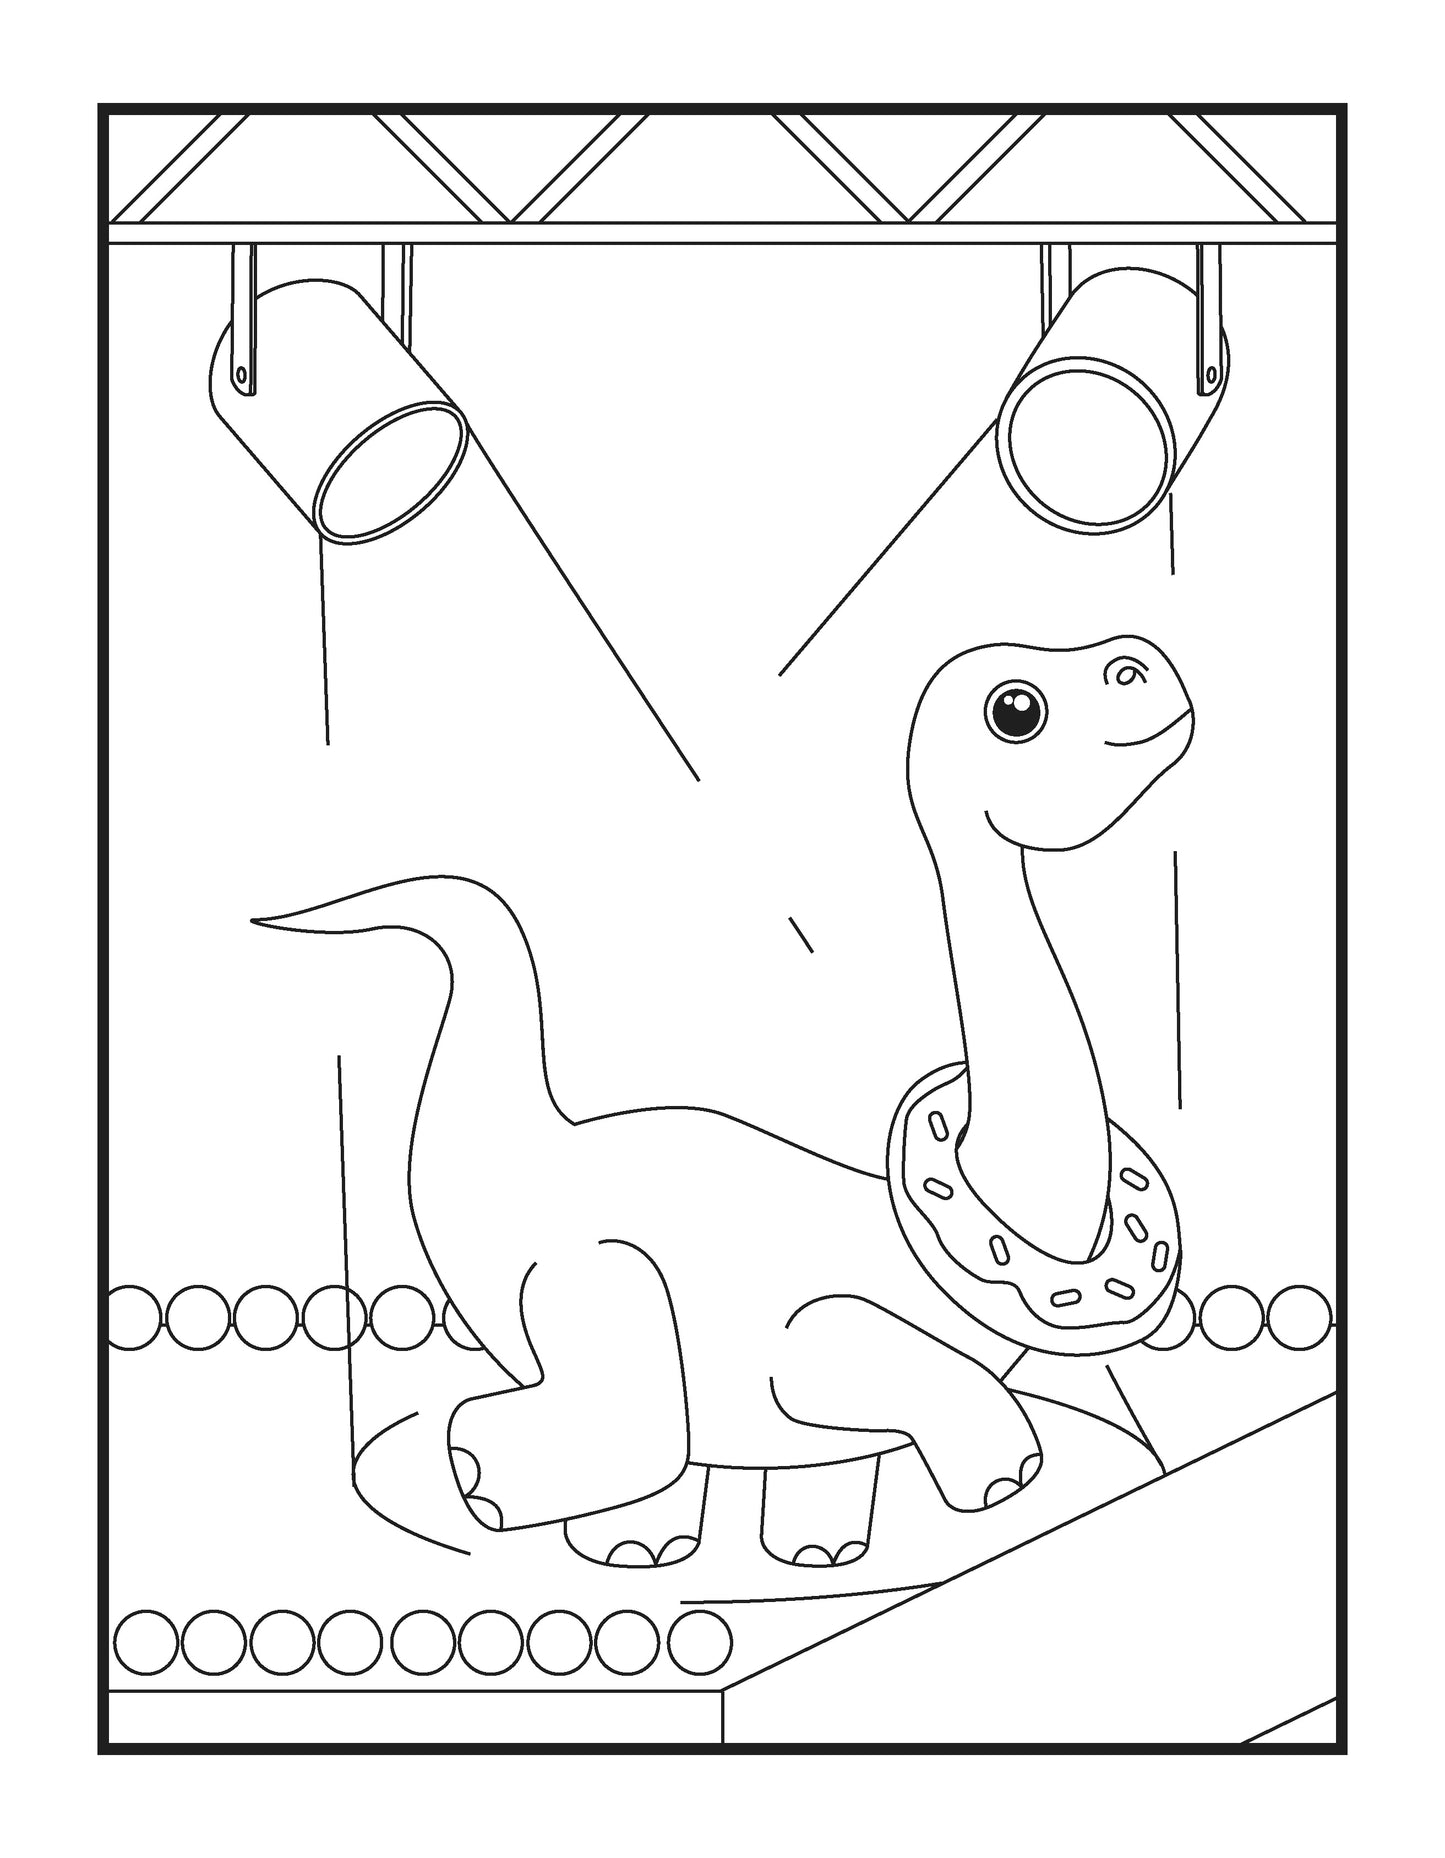 A coloring page features a smiling cartoon dinosaur on a stage with spotlights. The friendly Brontosaurus, adorned with a doughnut necklace, stands center stage. Above, stage lights point downwards, enhancing the theatrical feel. The dinosaur's long neck curves gracefully, and its tail sweeps behind. The backdrop is simple, with a line of lights framing the stage floor. This scene is ready for children to bring to life with color, encouraging imagination and a love for the performing arts.